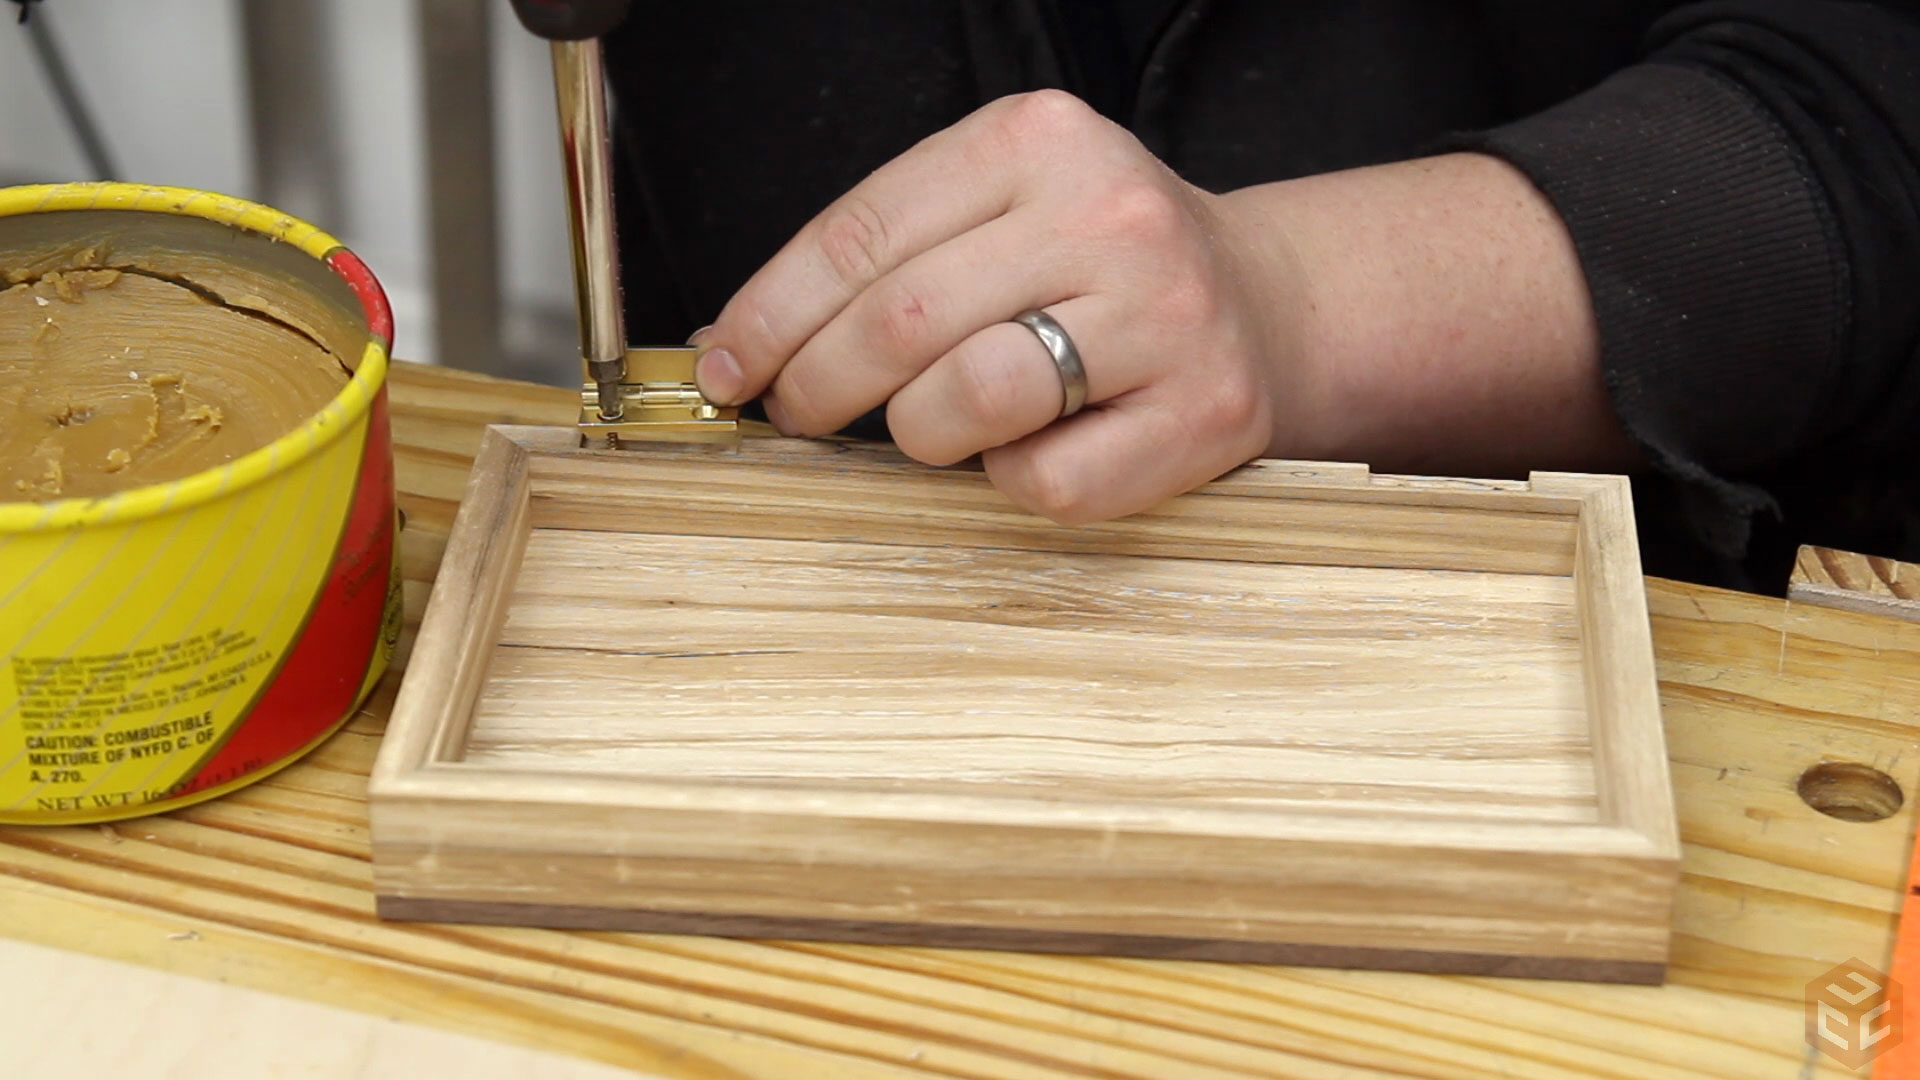 How to make a wooden box